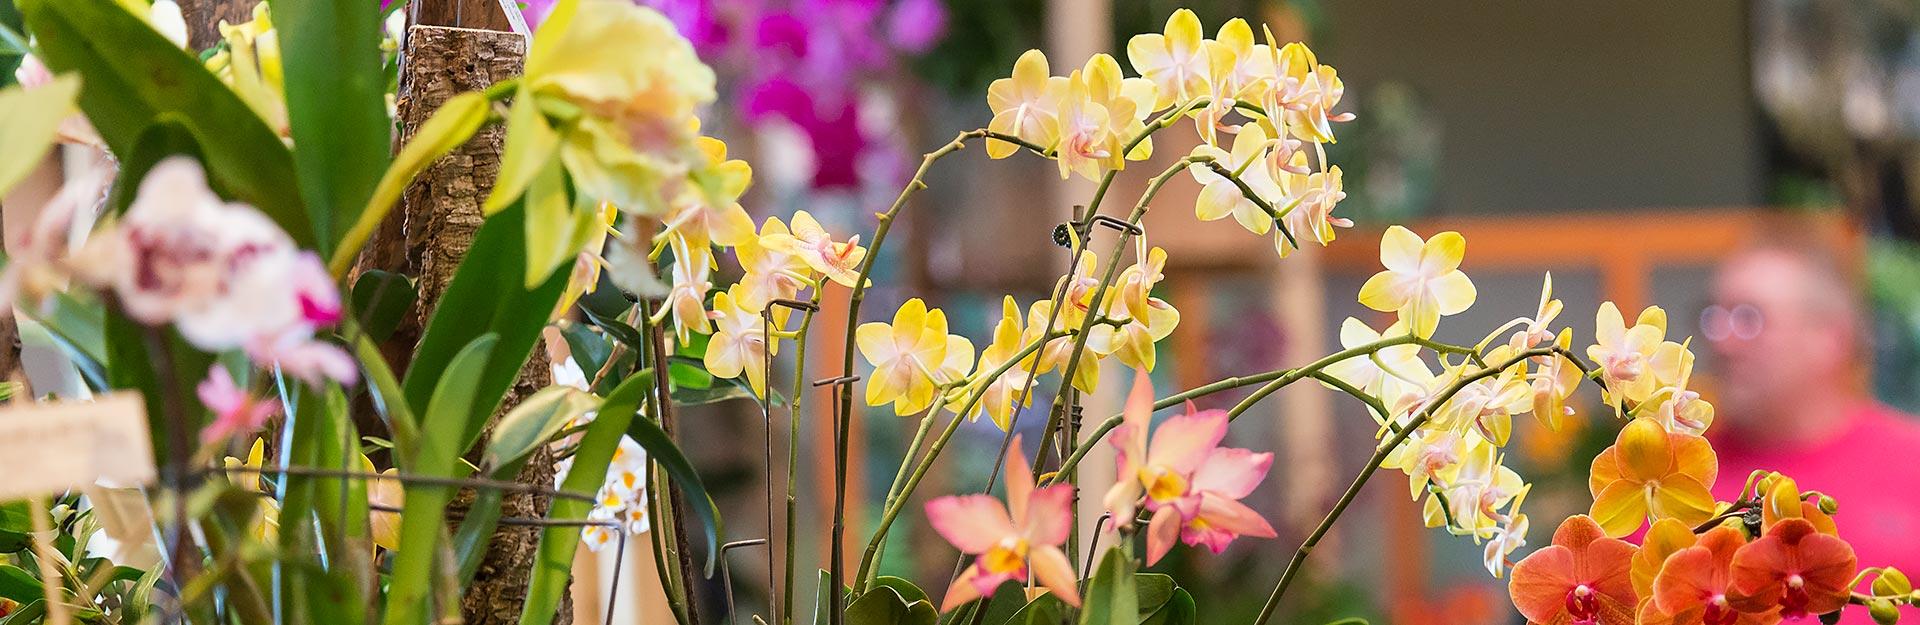 Illinois Orchid Society Fall Show & Sale at the Chicago Botanic Garden